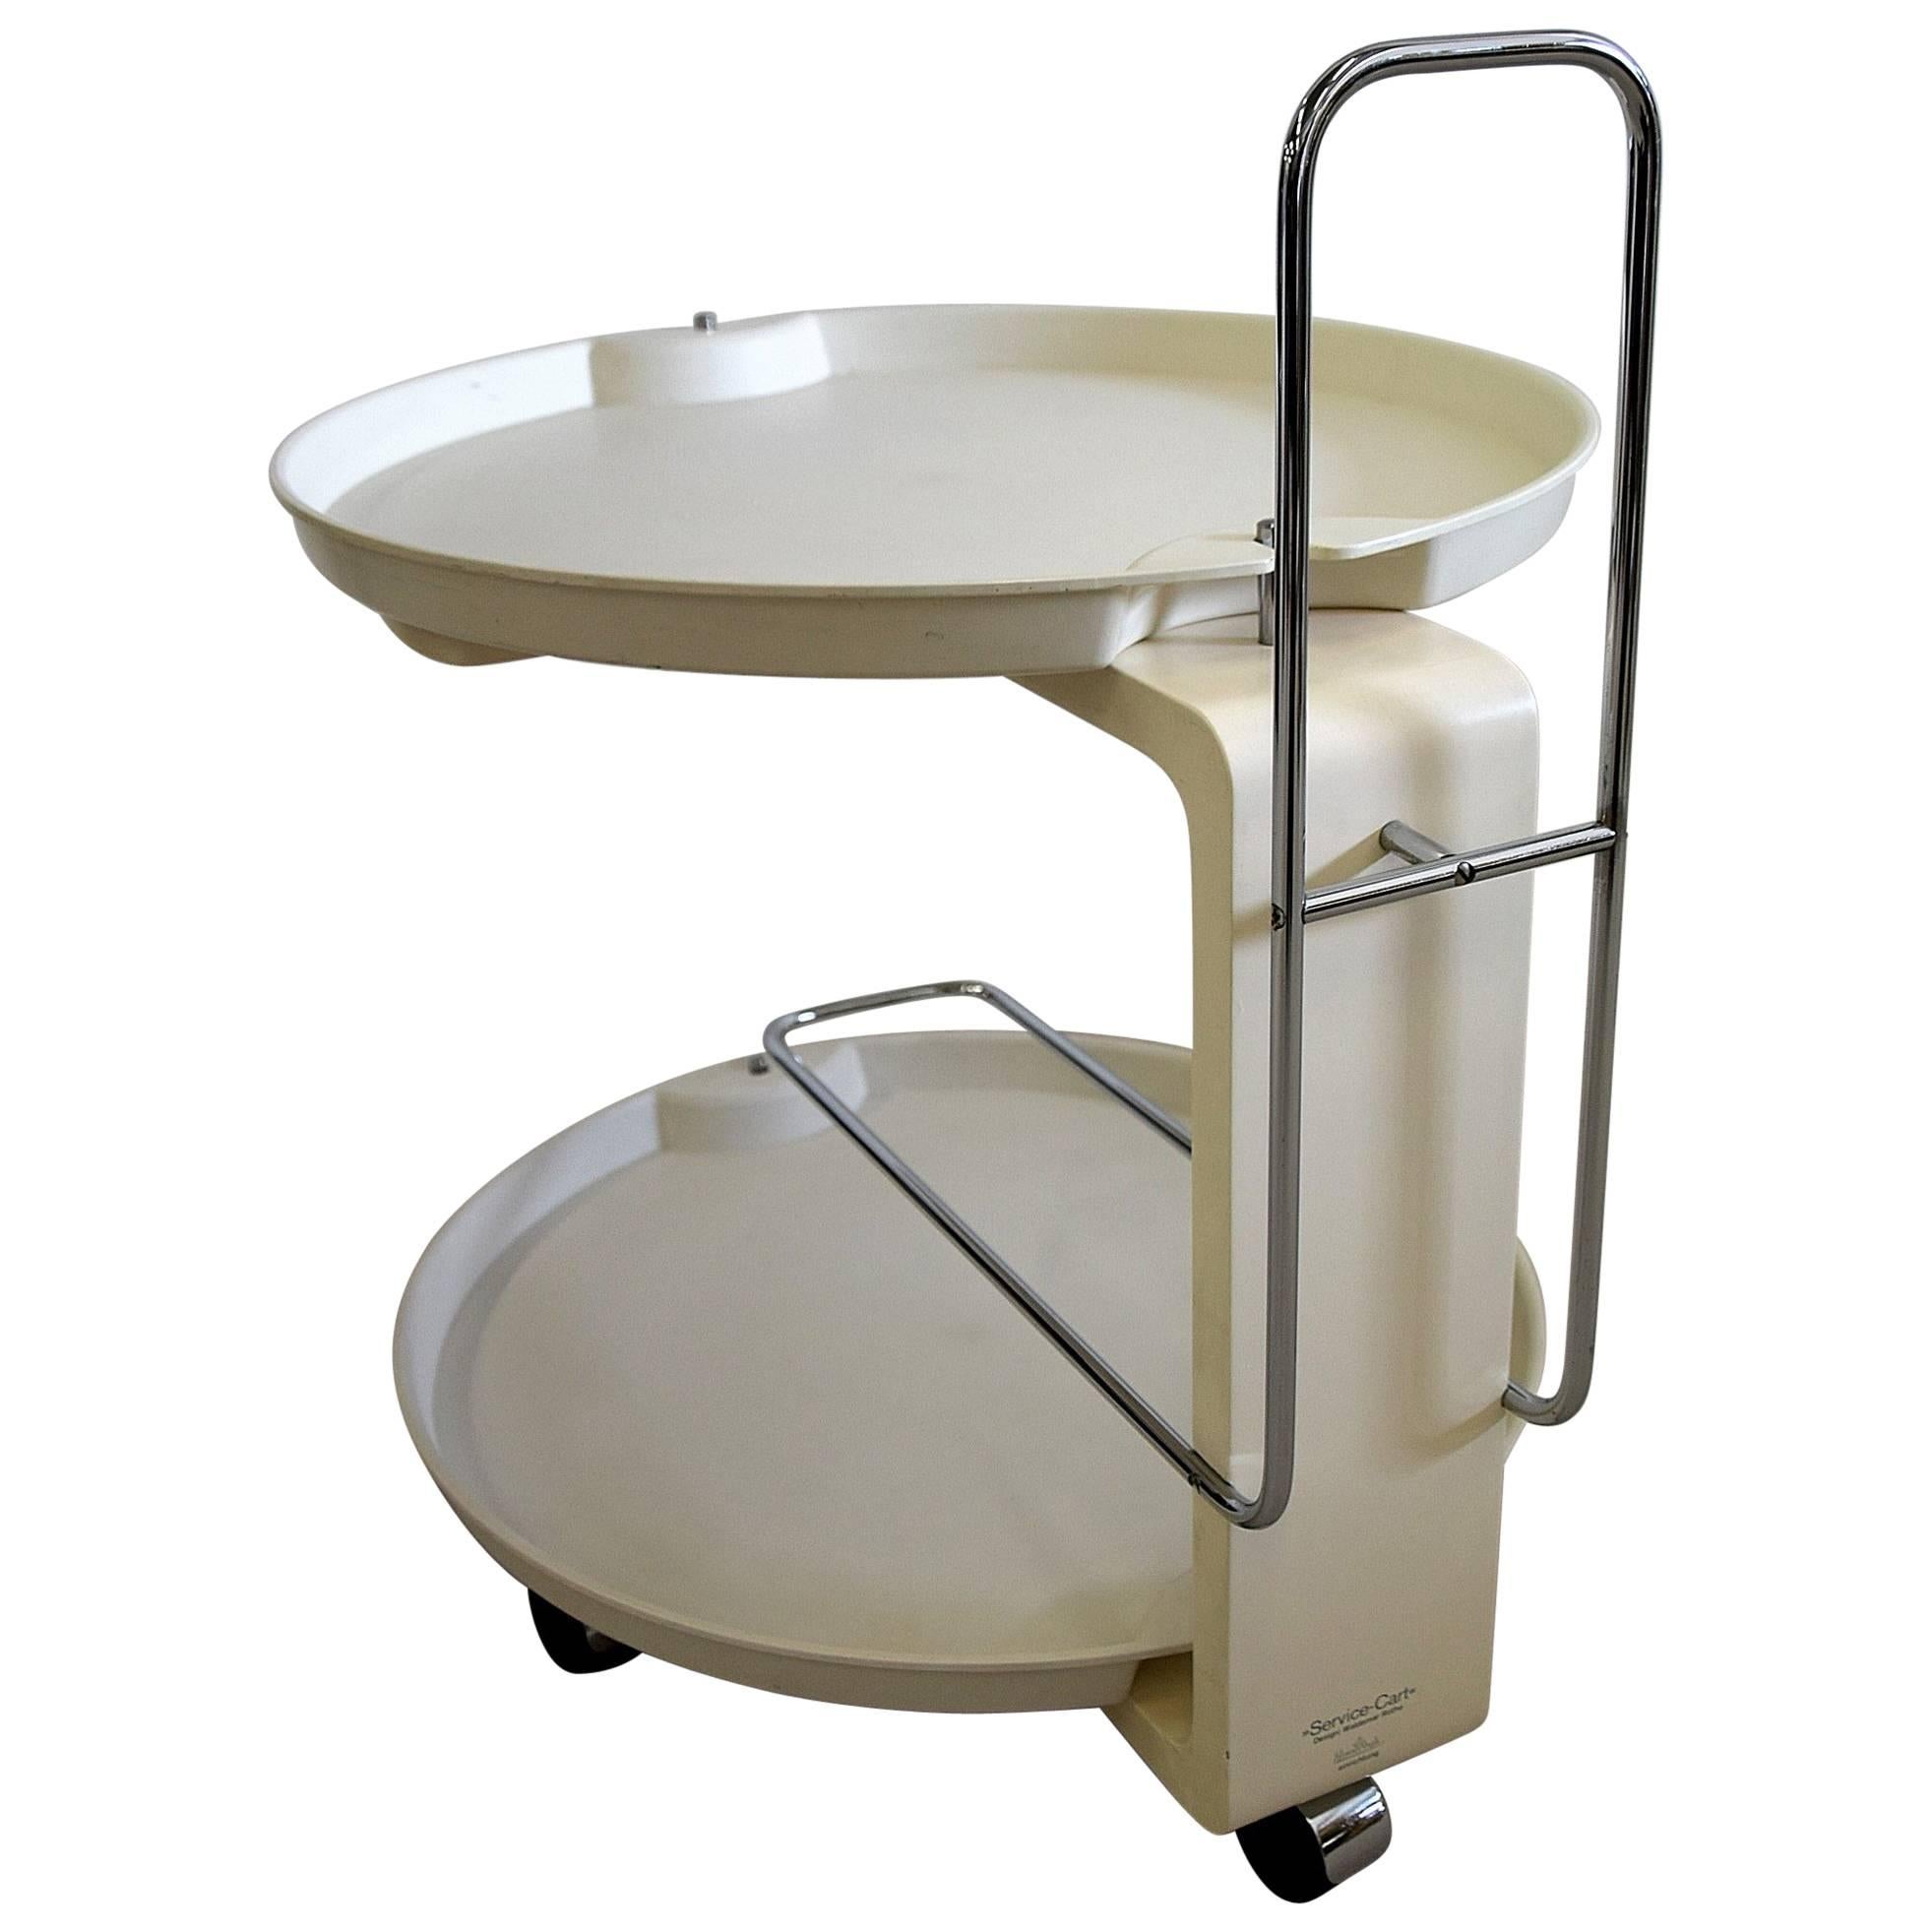 Rosenthal Service Trolley by Waldemar Rothe